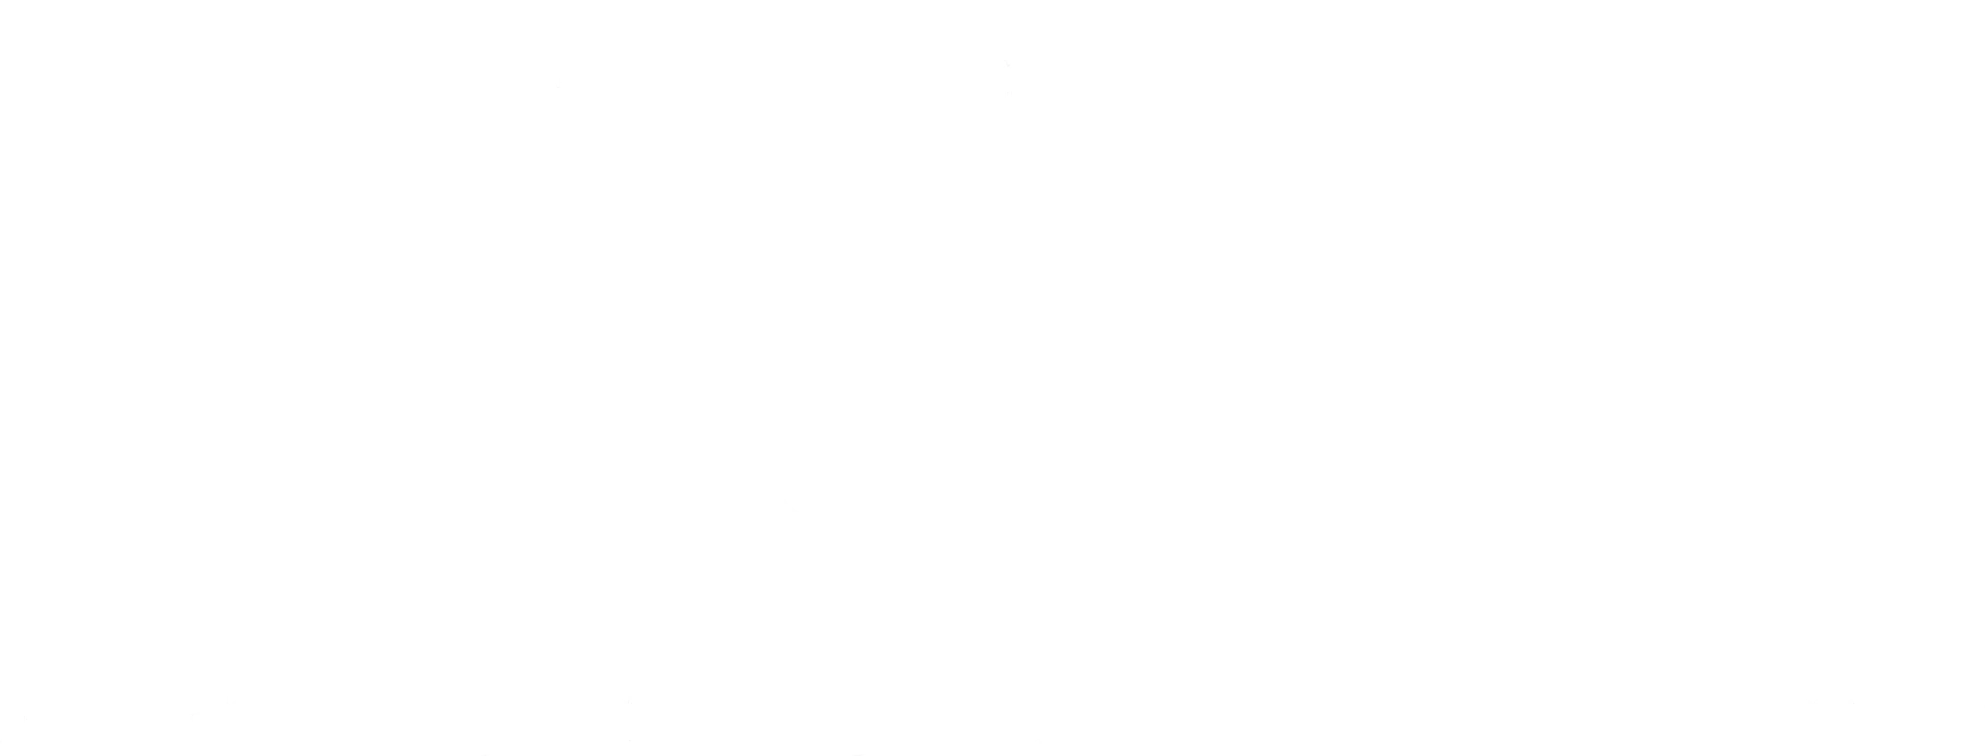 unlock your lute logo and A luthier's guide to guitar fretboard mechanics tagline